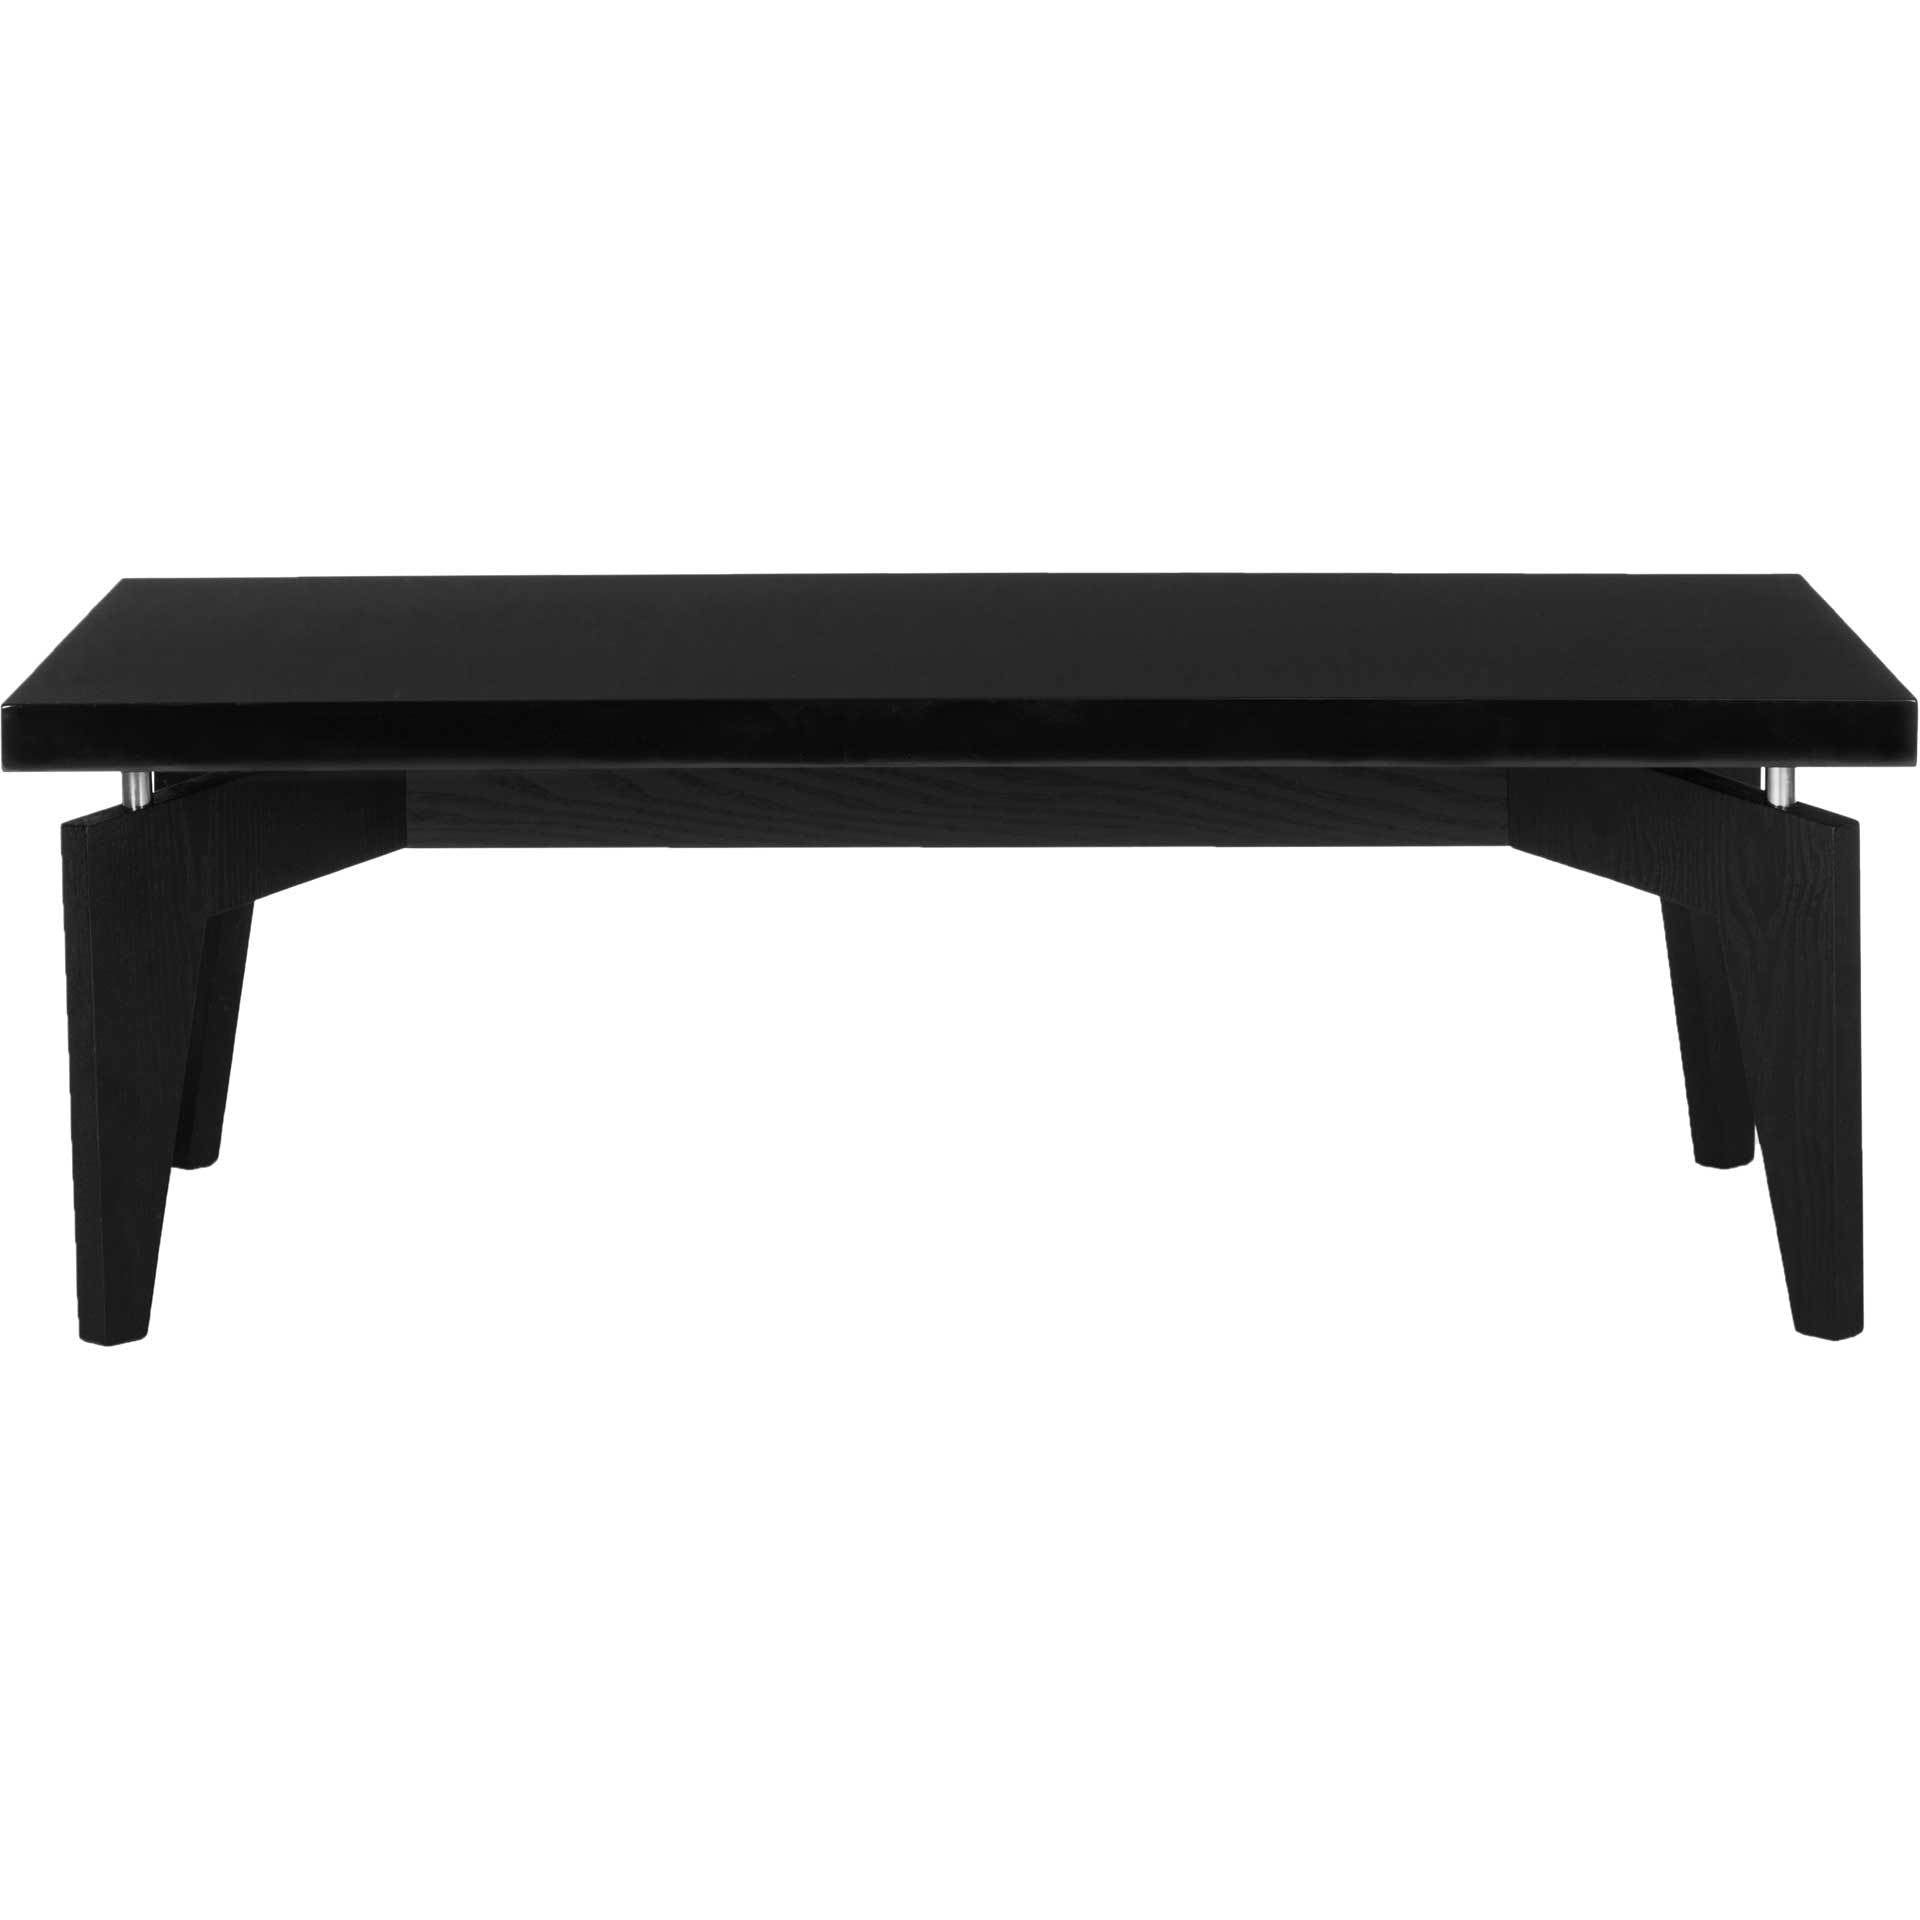 Joziah Lacquer Floating Top Coffee Table Black